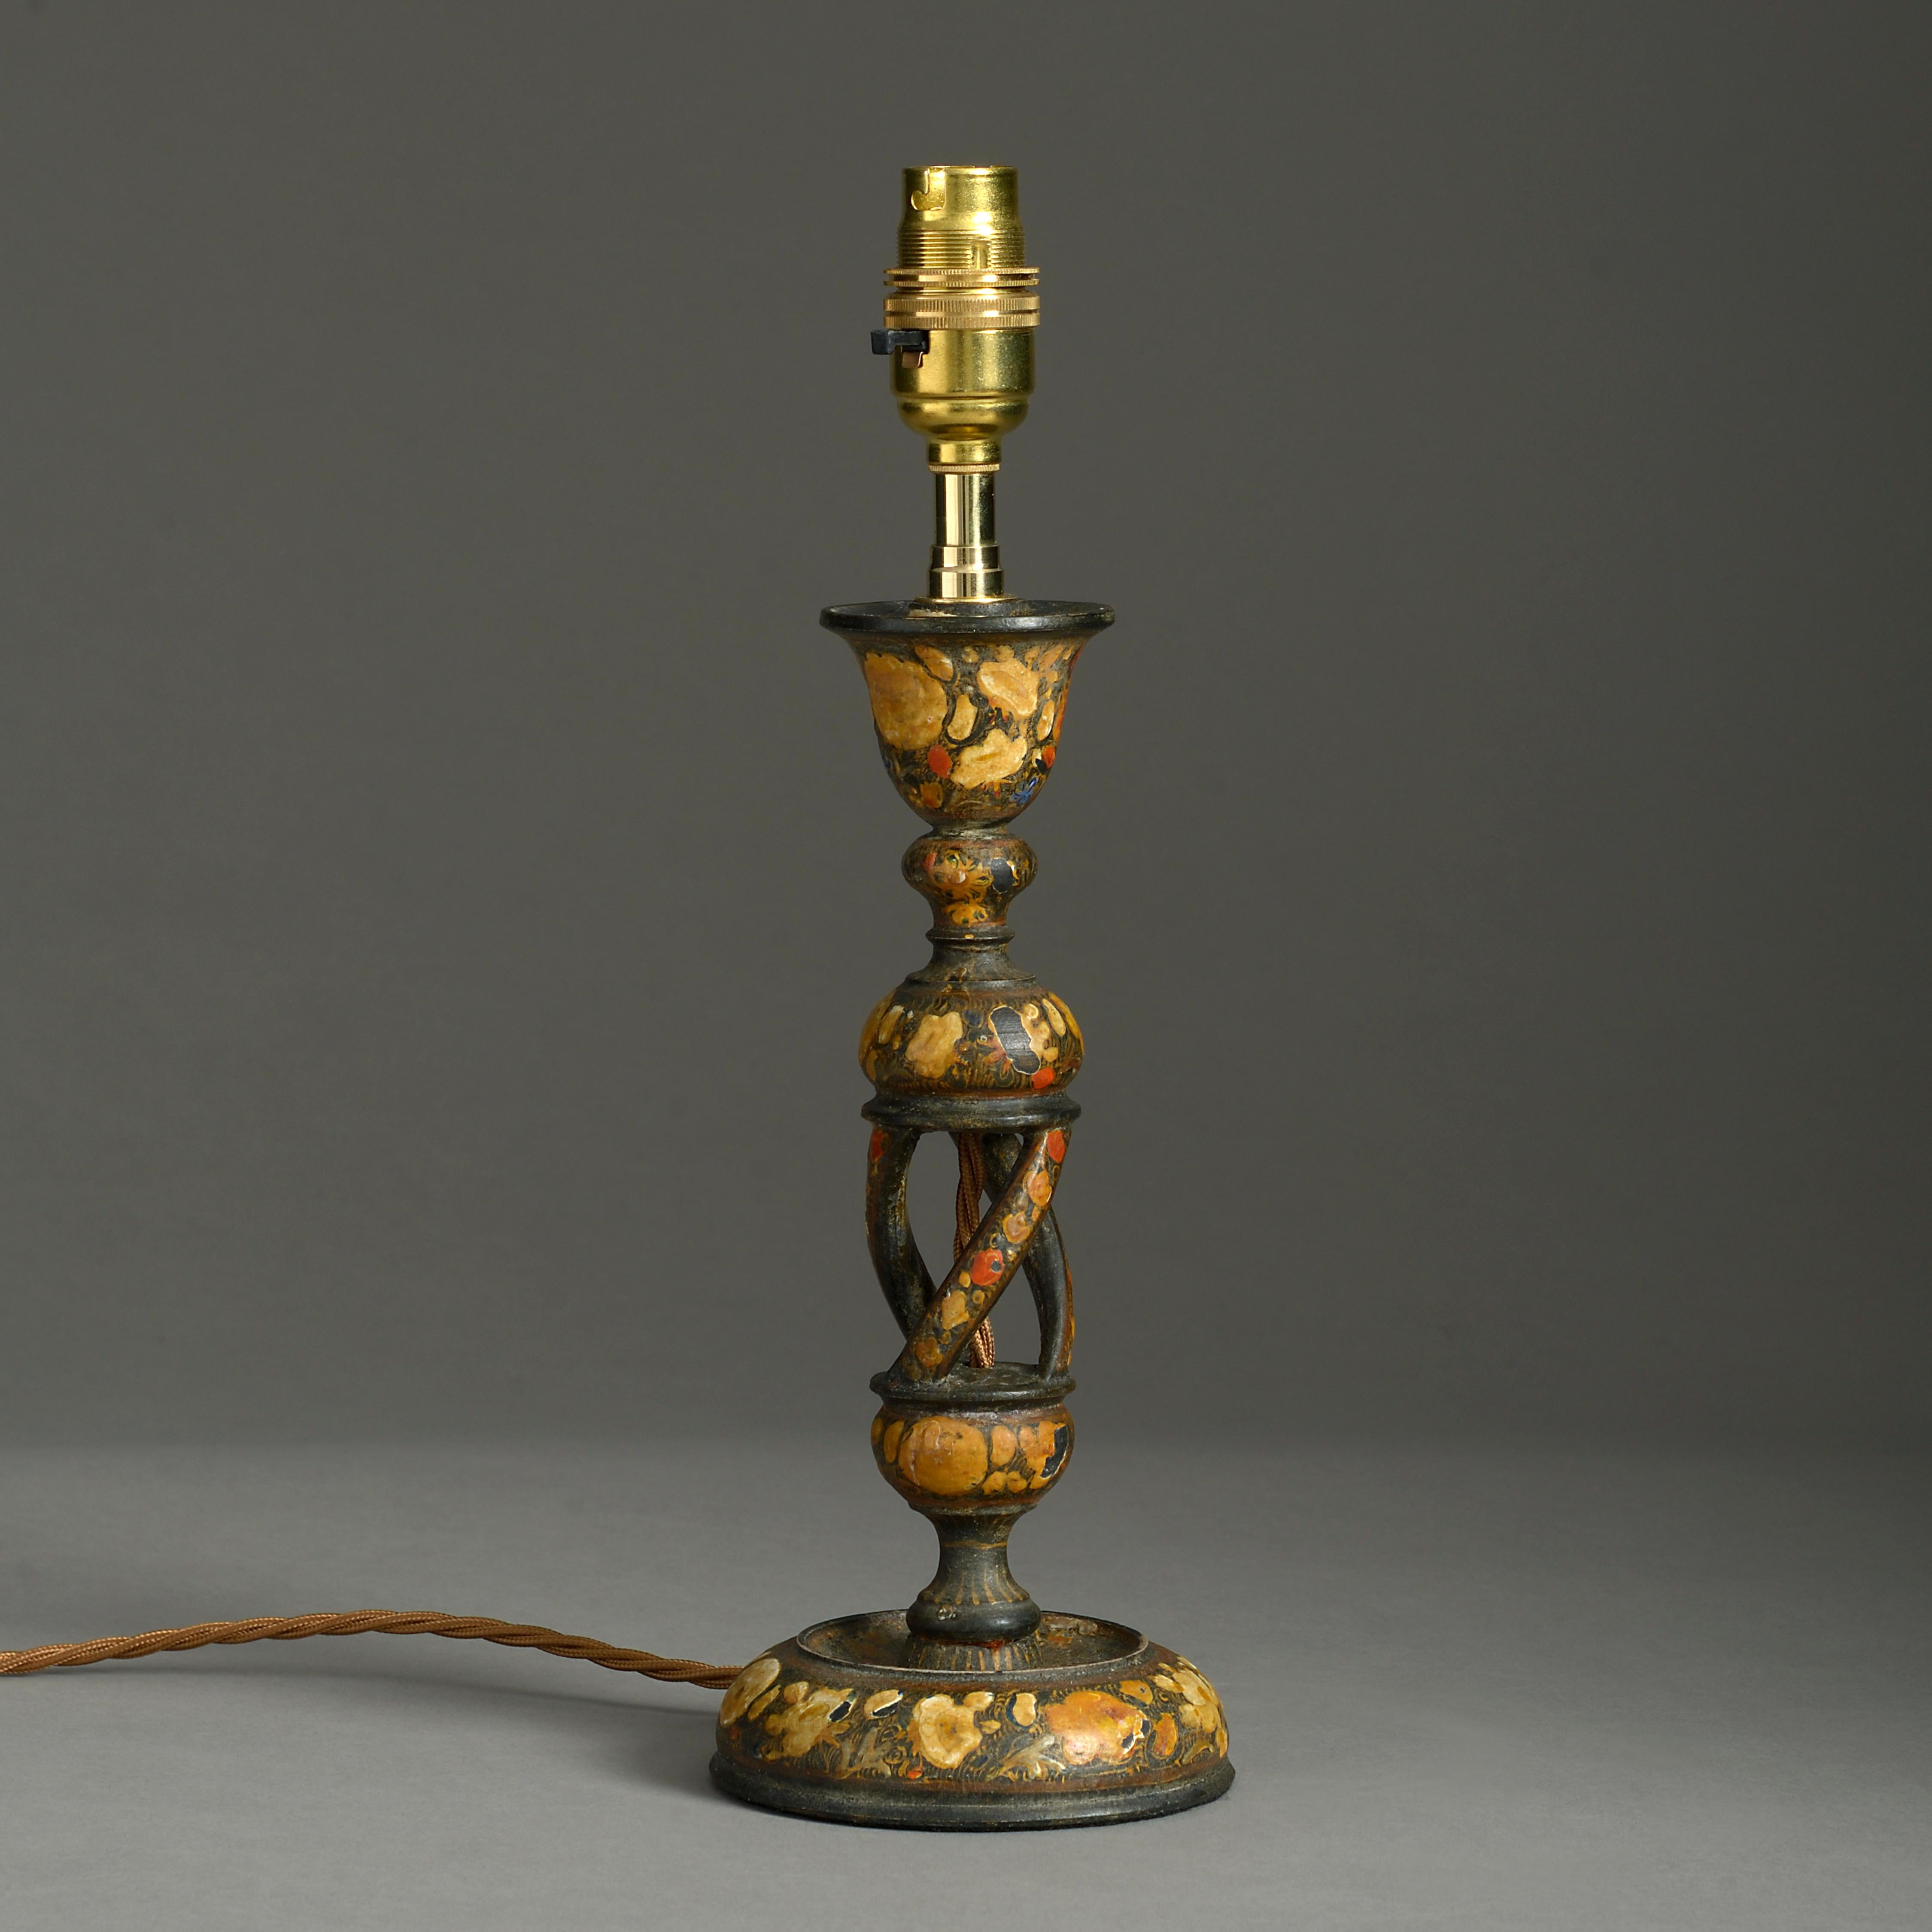 An early 20th century Kashmiri lacquer table lamp of small scale, decorated with stylized polychrome floral designs and having a twisting stem, raised upon a circular base.

Dimensions refer only to lacquered elements.

Shade available to